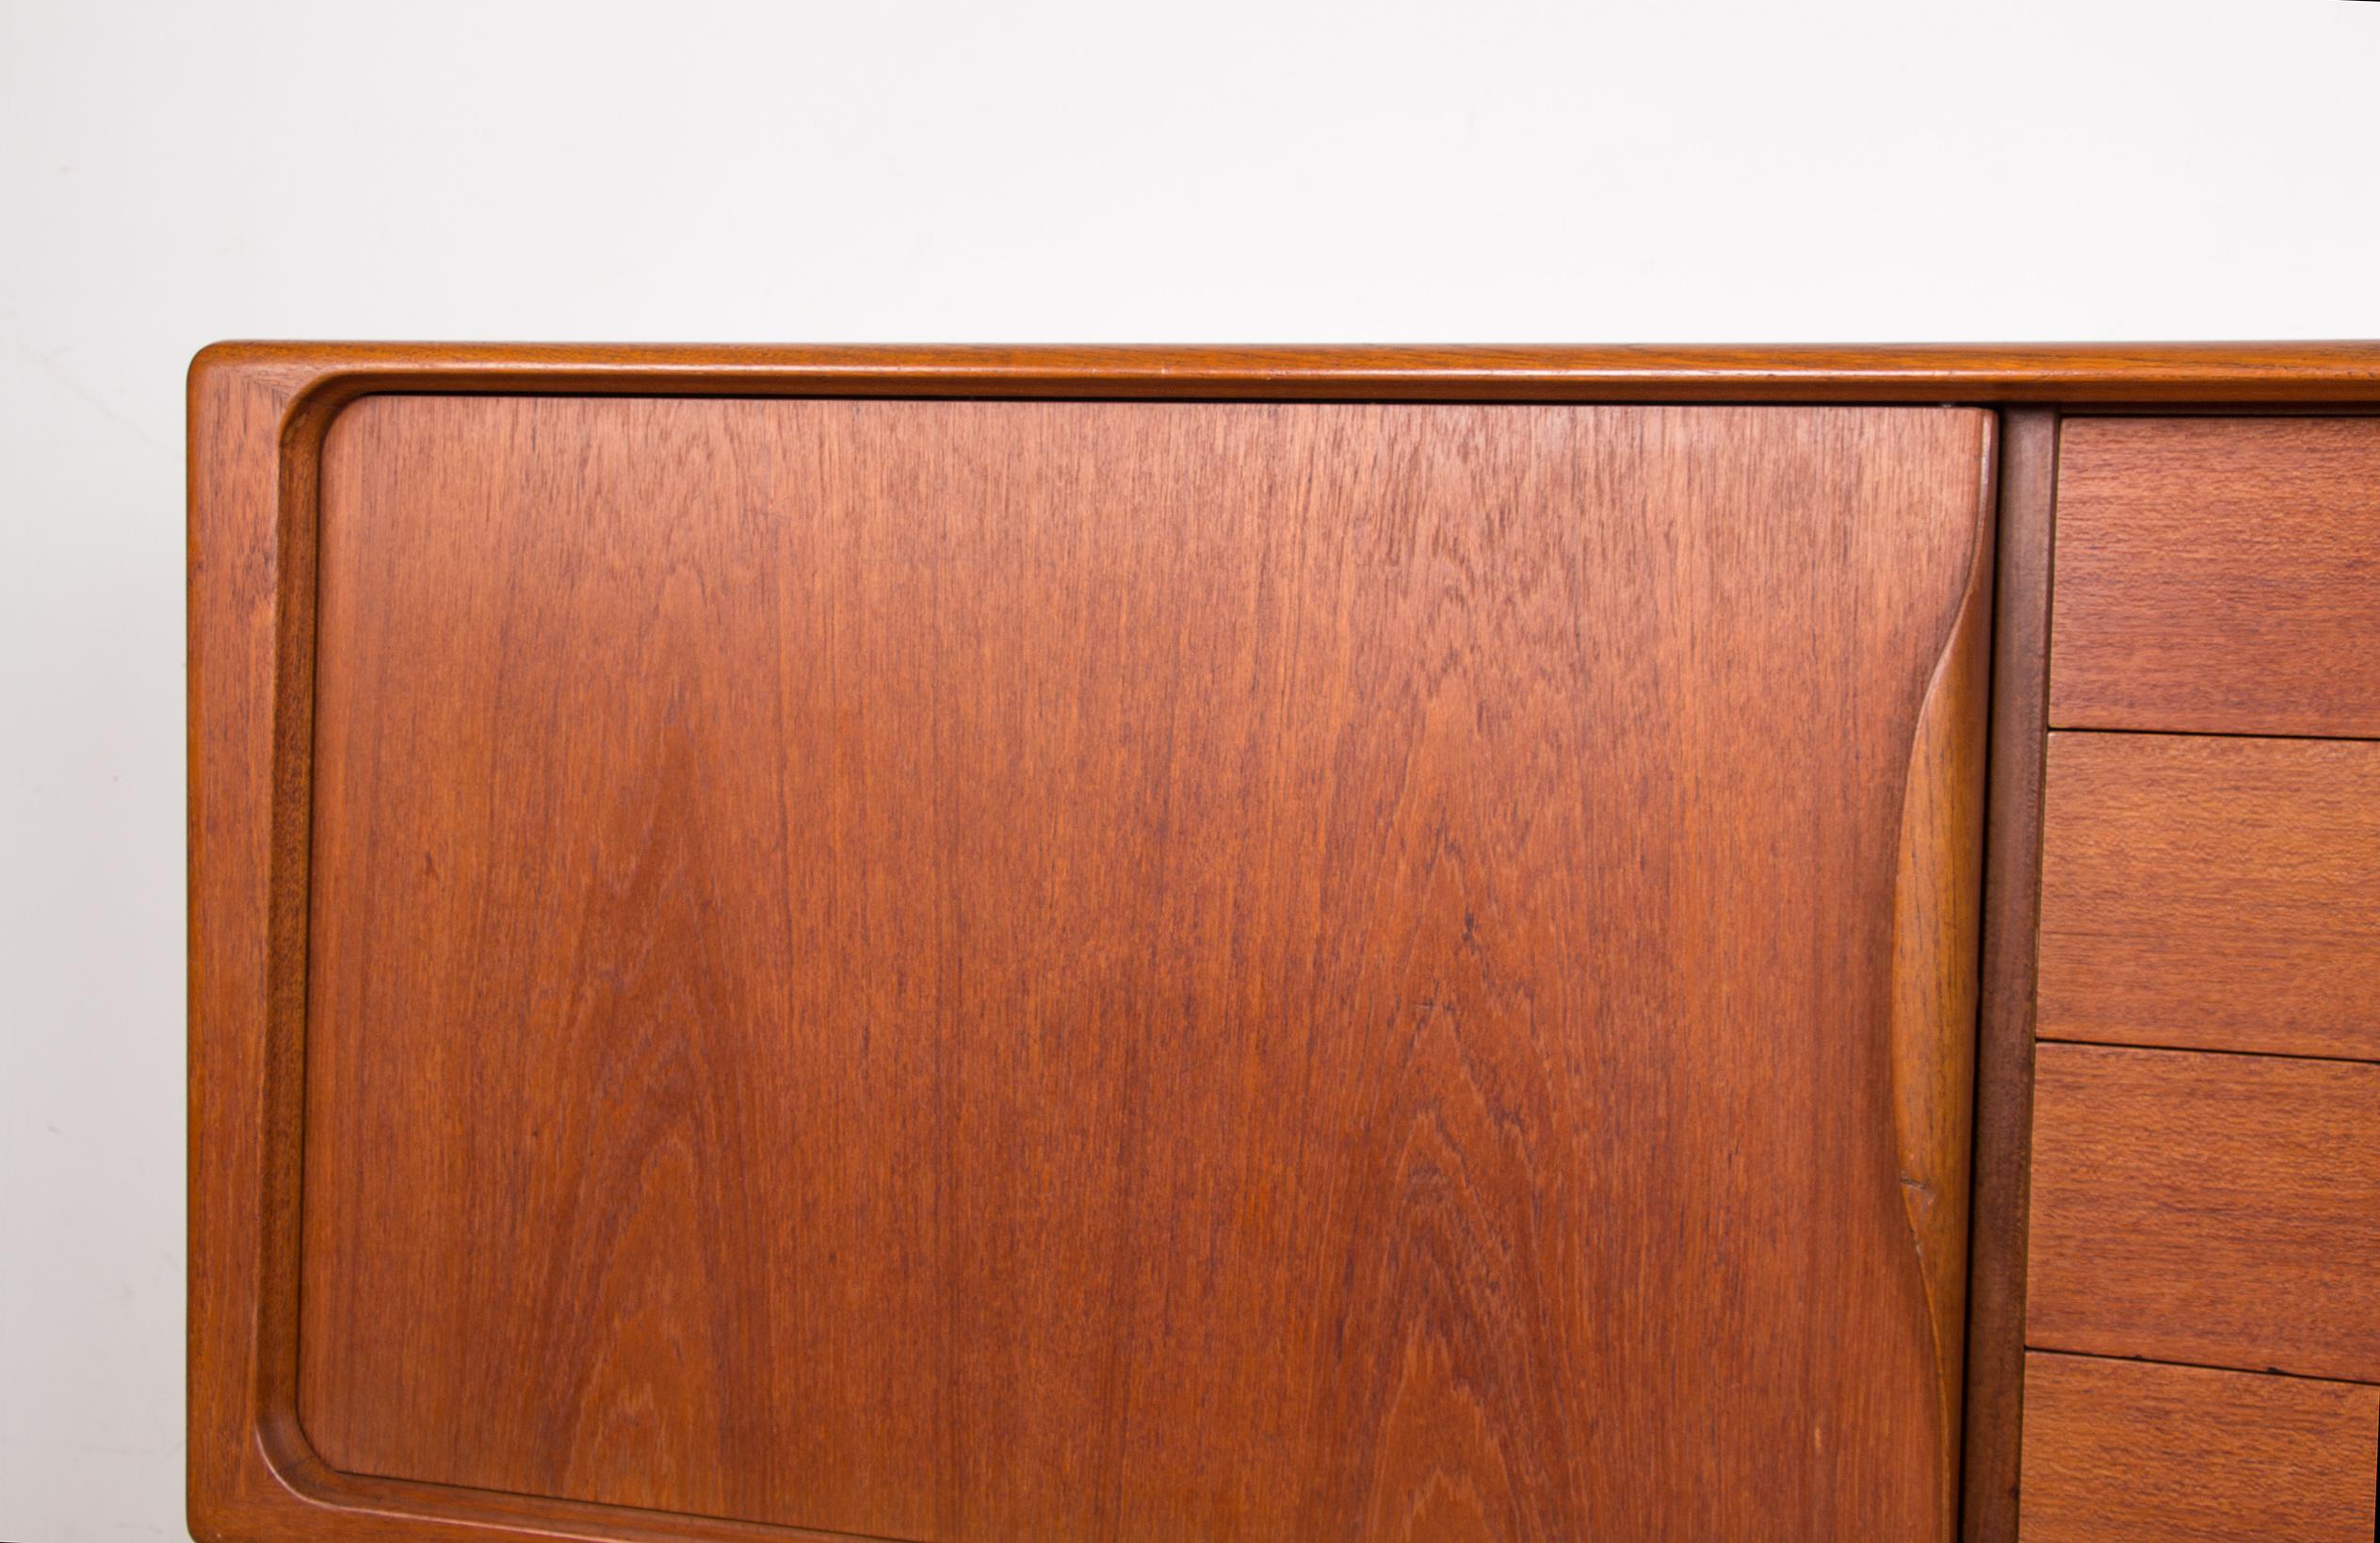 Mid-20th Century Danish Teak Sideboard by Henry Walter Klein for Bramin 1960. For Sale